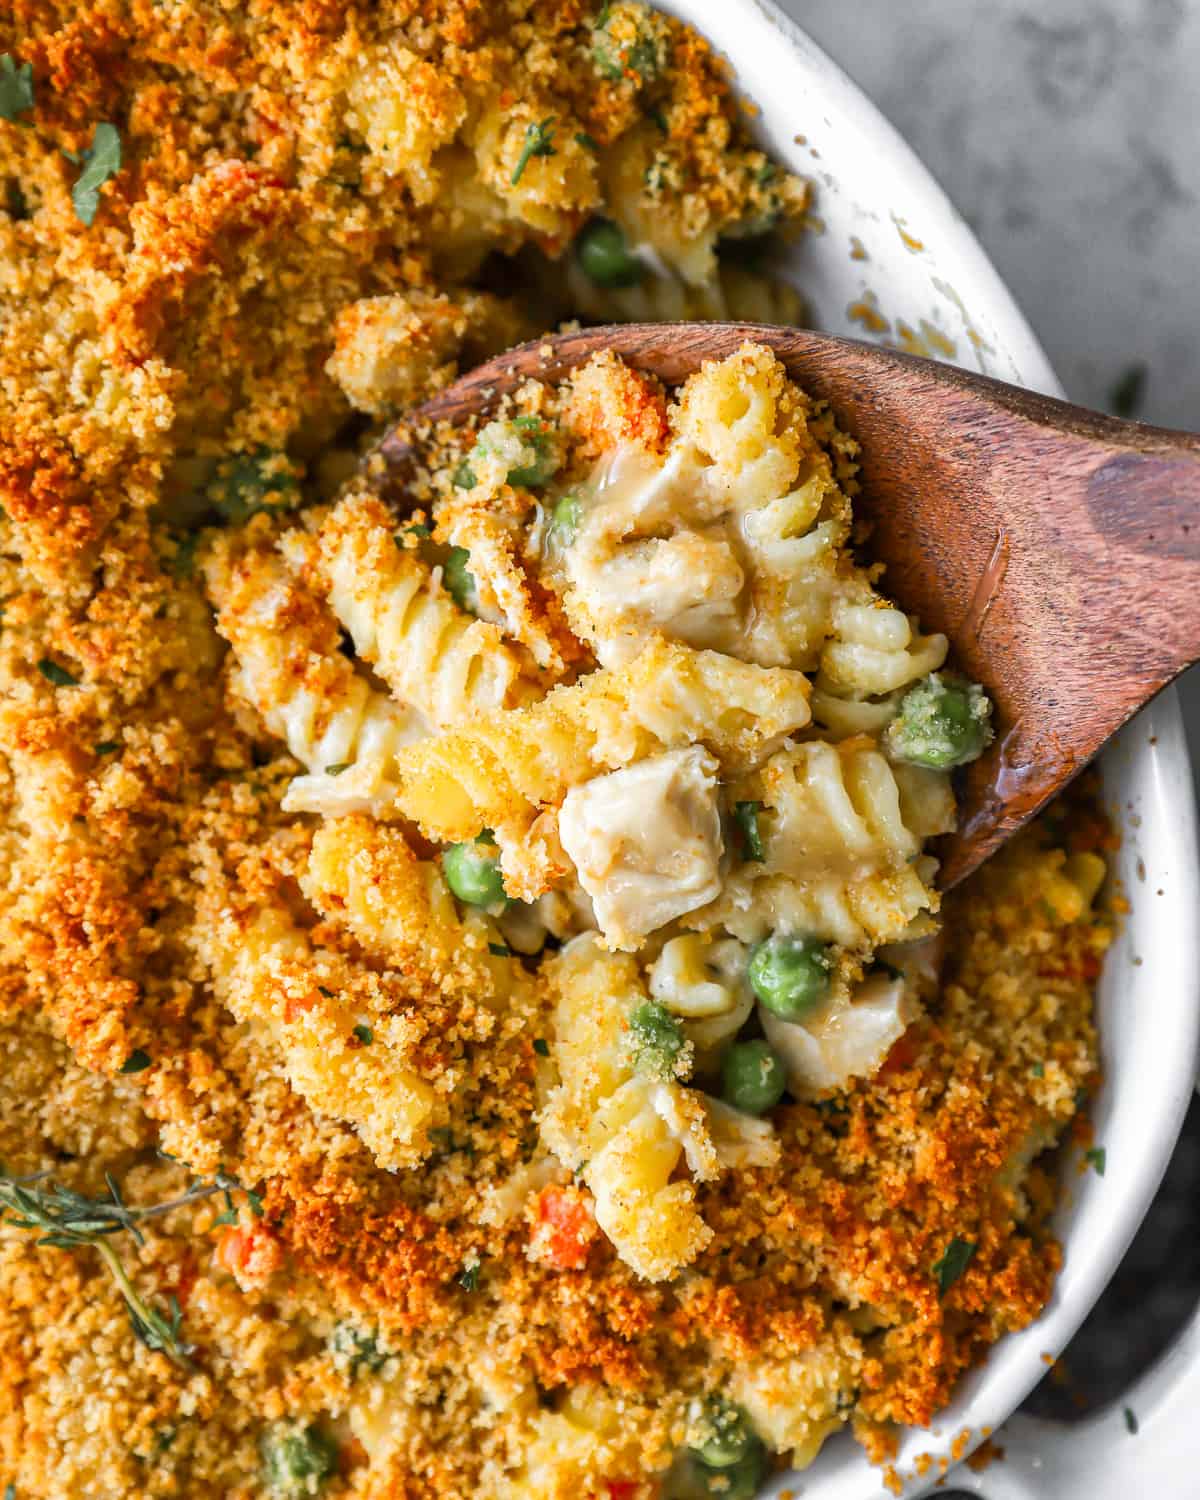 Leftover turkey casserole filled with peas, pasta, cubes of turkey, and breadcrumbs.